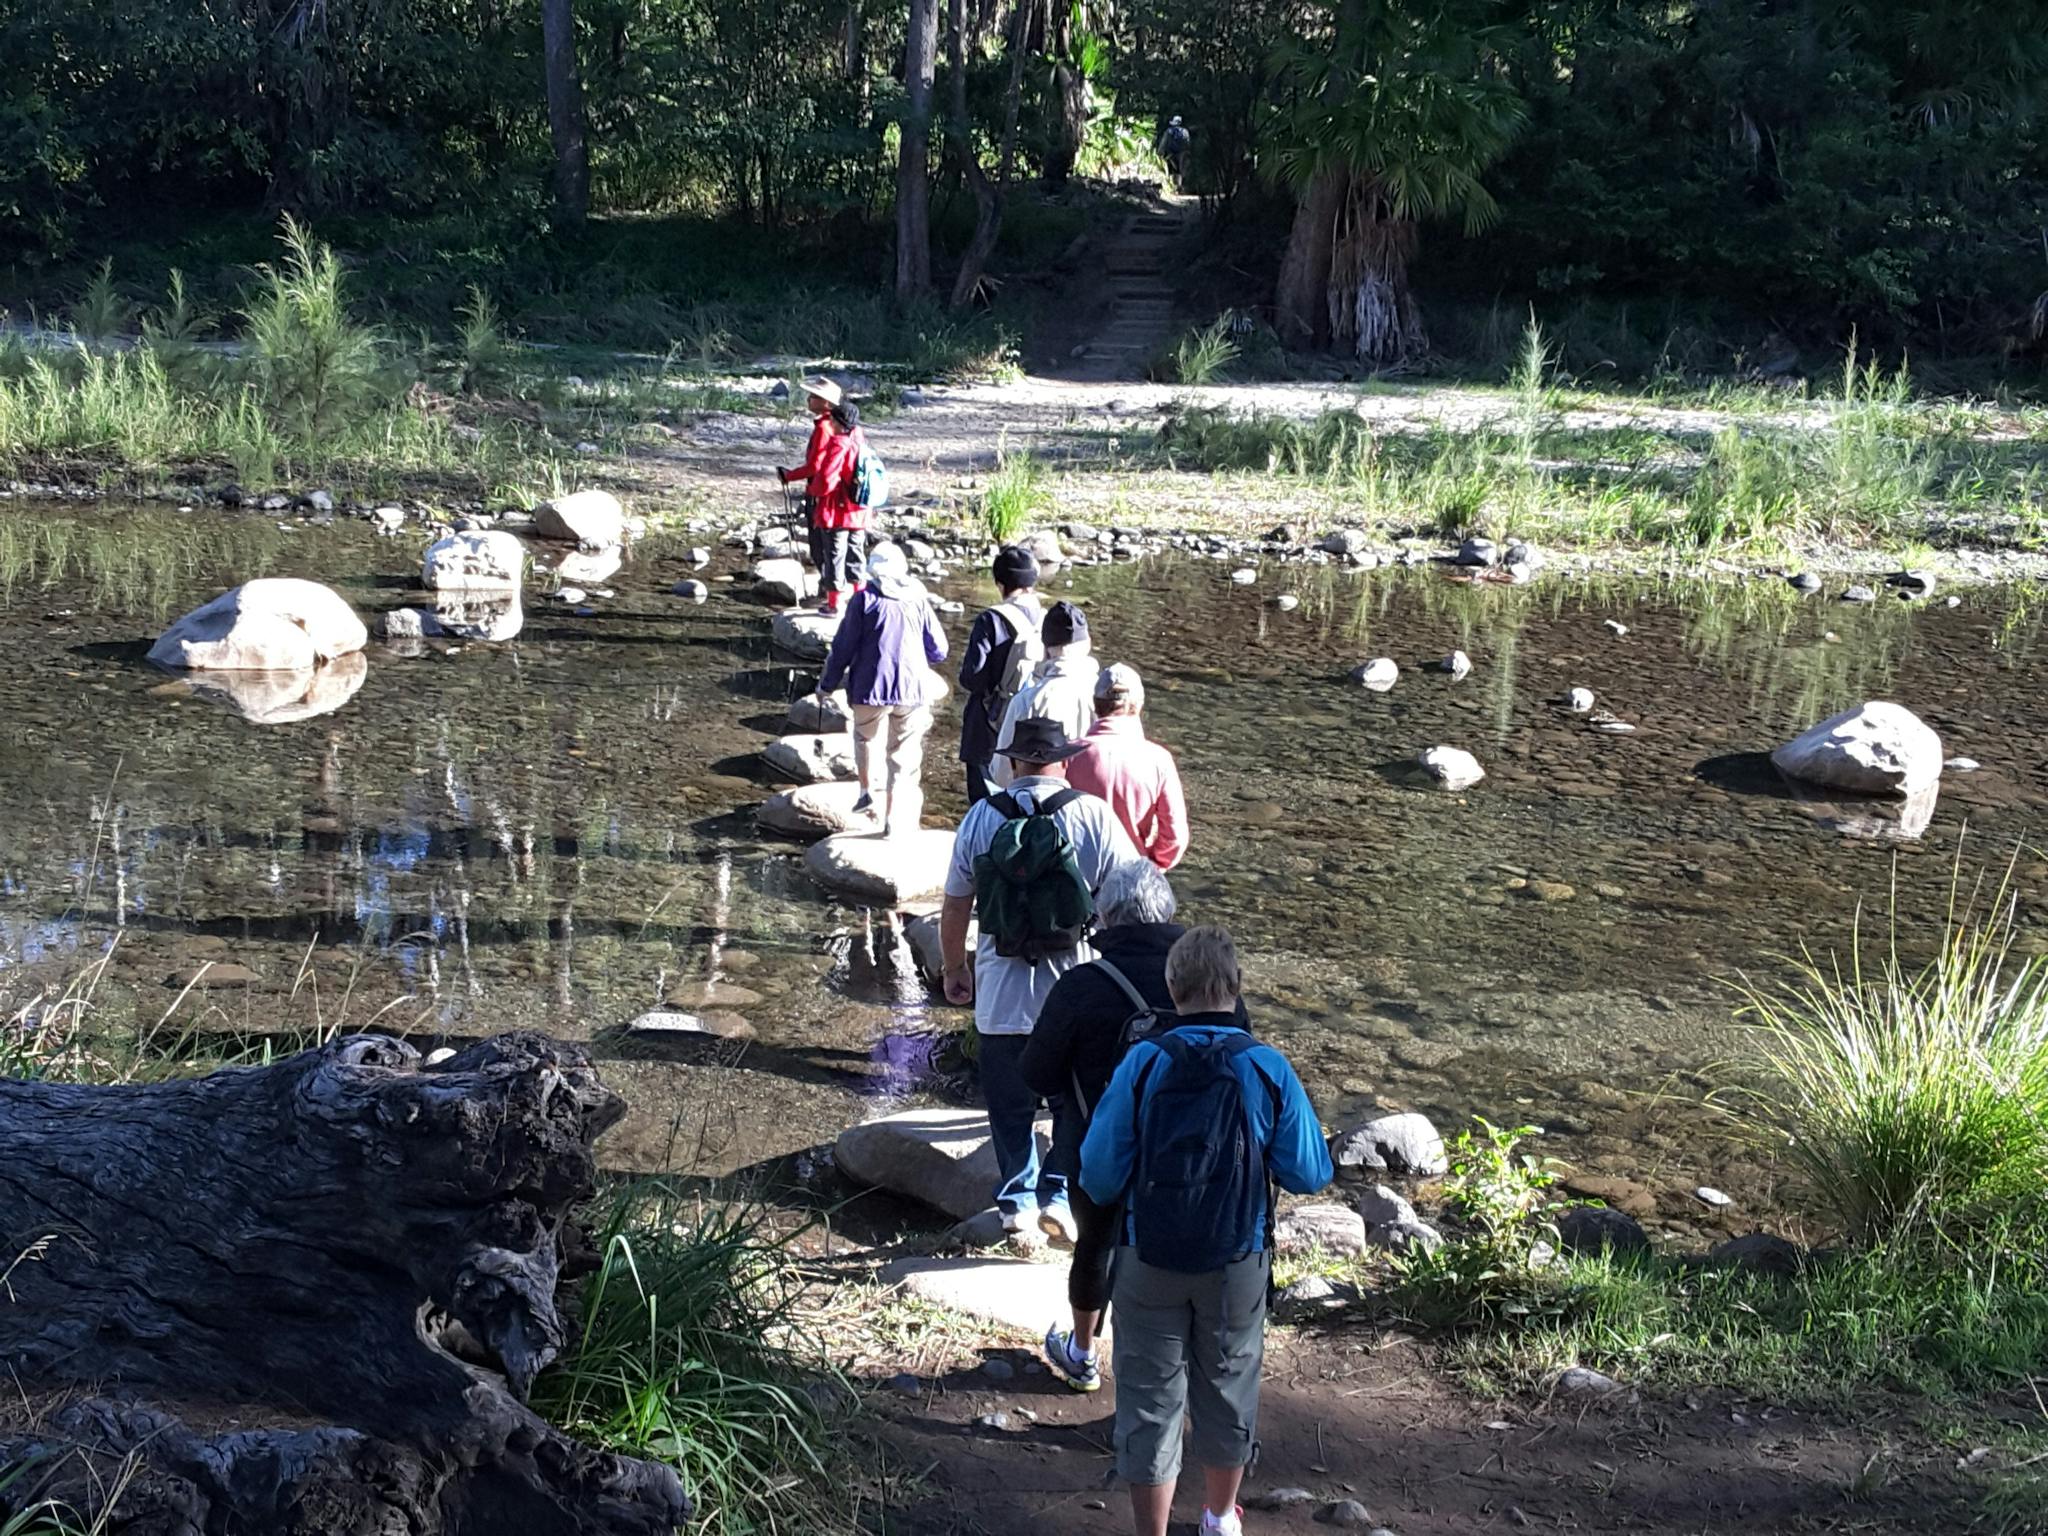 Guided nature walk to the Moss Gardens at Carnarvon Gorge National Park